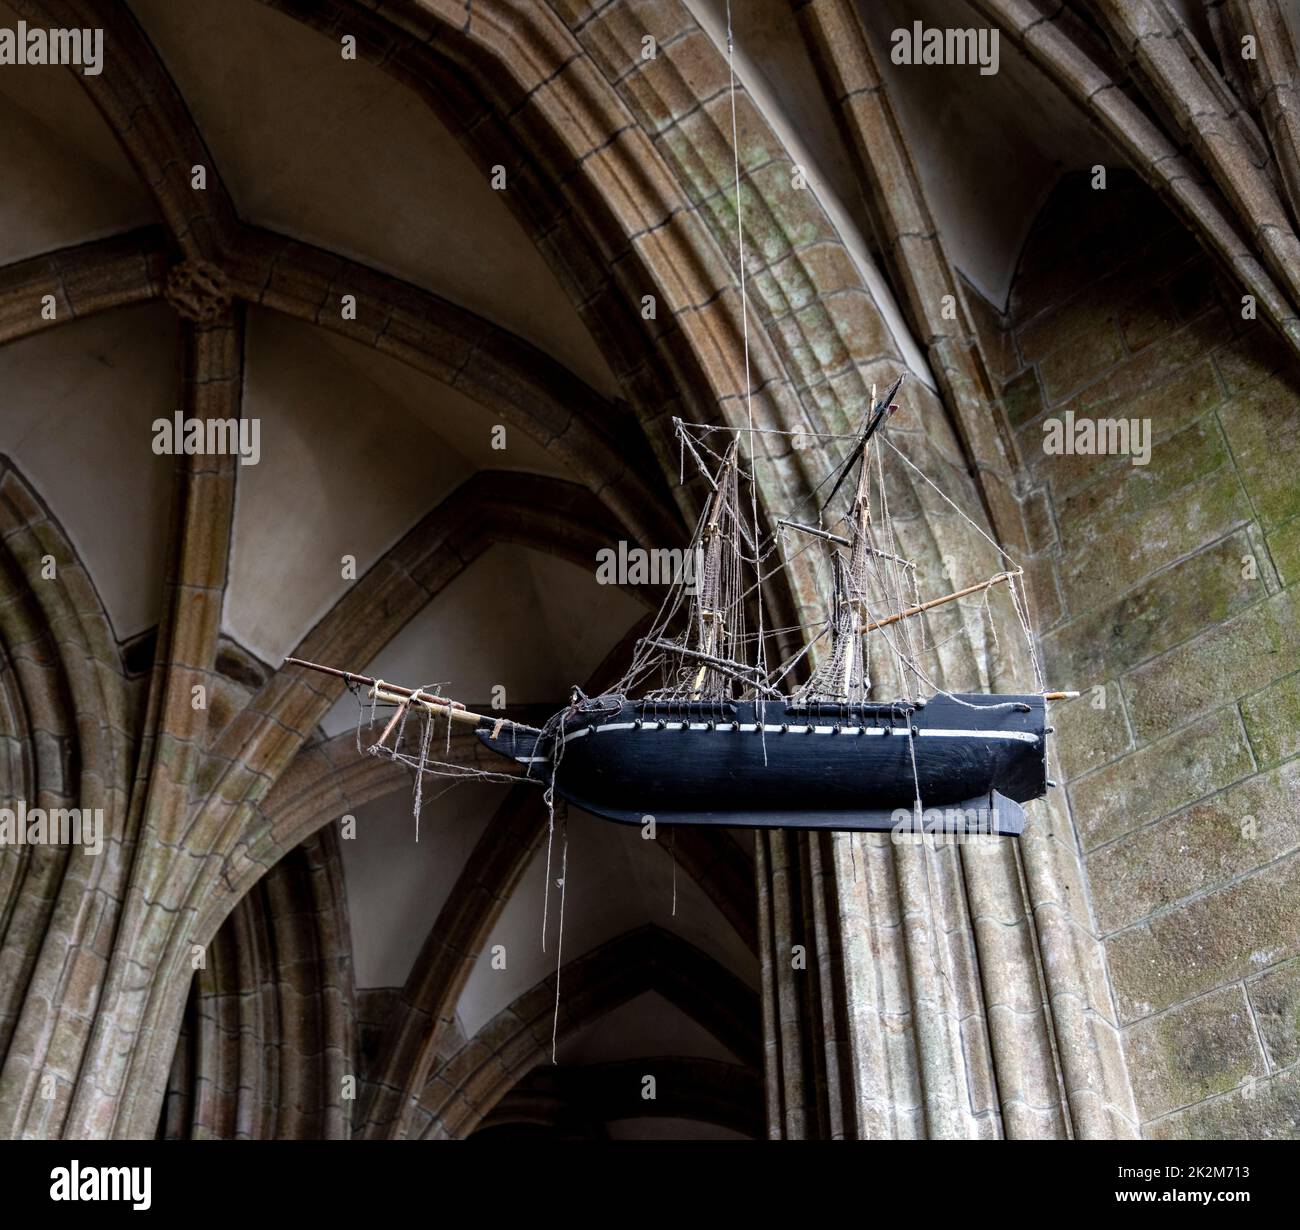 Scale model of the boat L'Avranchain located in the gothic choir in the ambulatory of Le Mont Saint-Michel, Normandy, France. Stock Photo